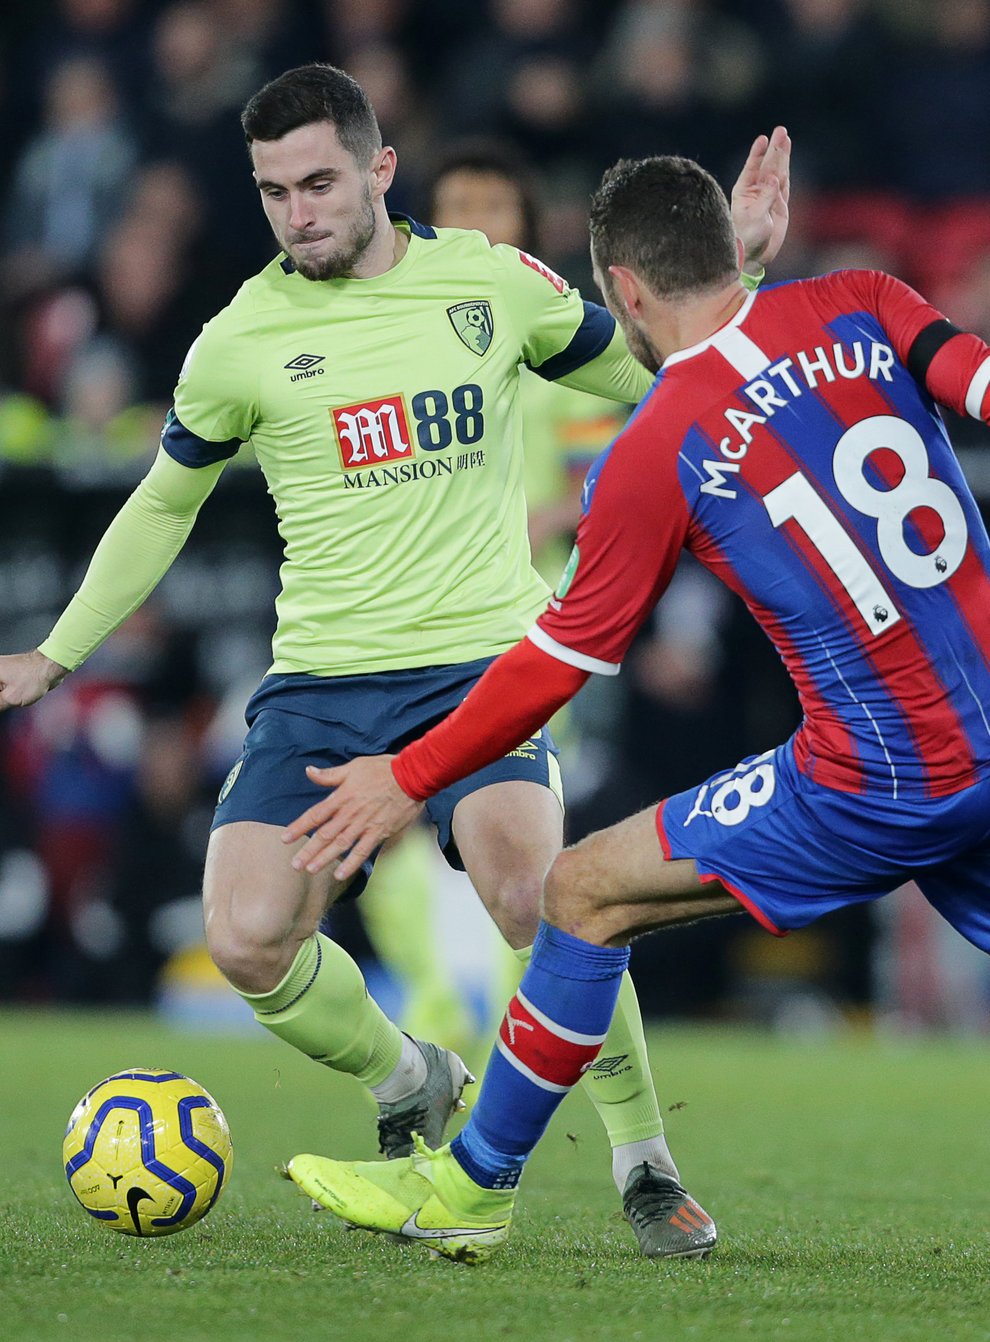 Palace beat Bournemouth 1-0 at Selhurst Park earlier this season